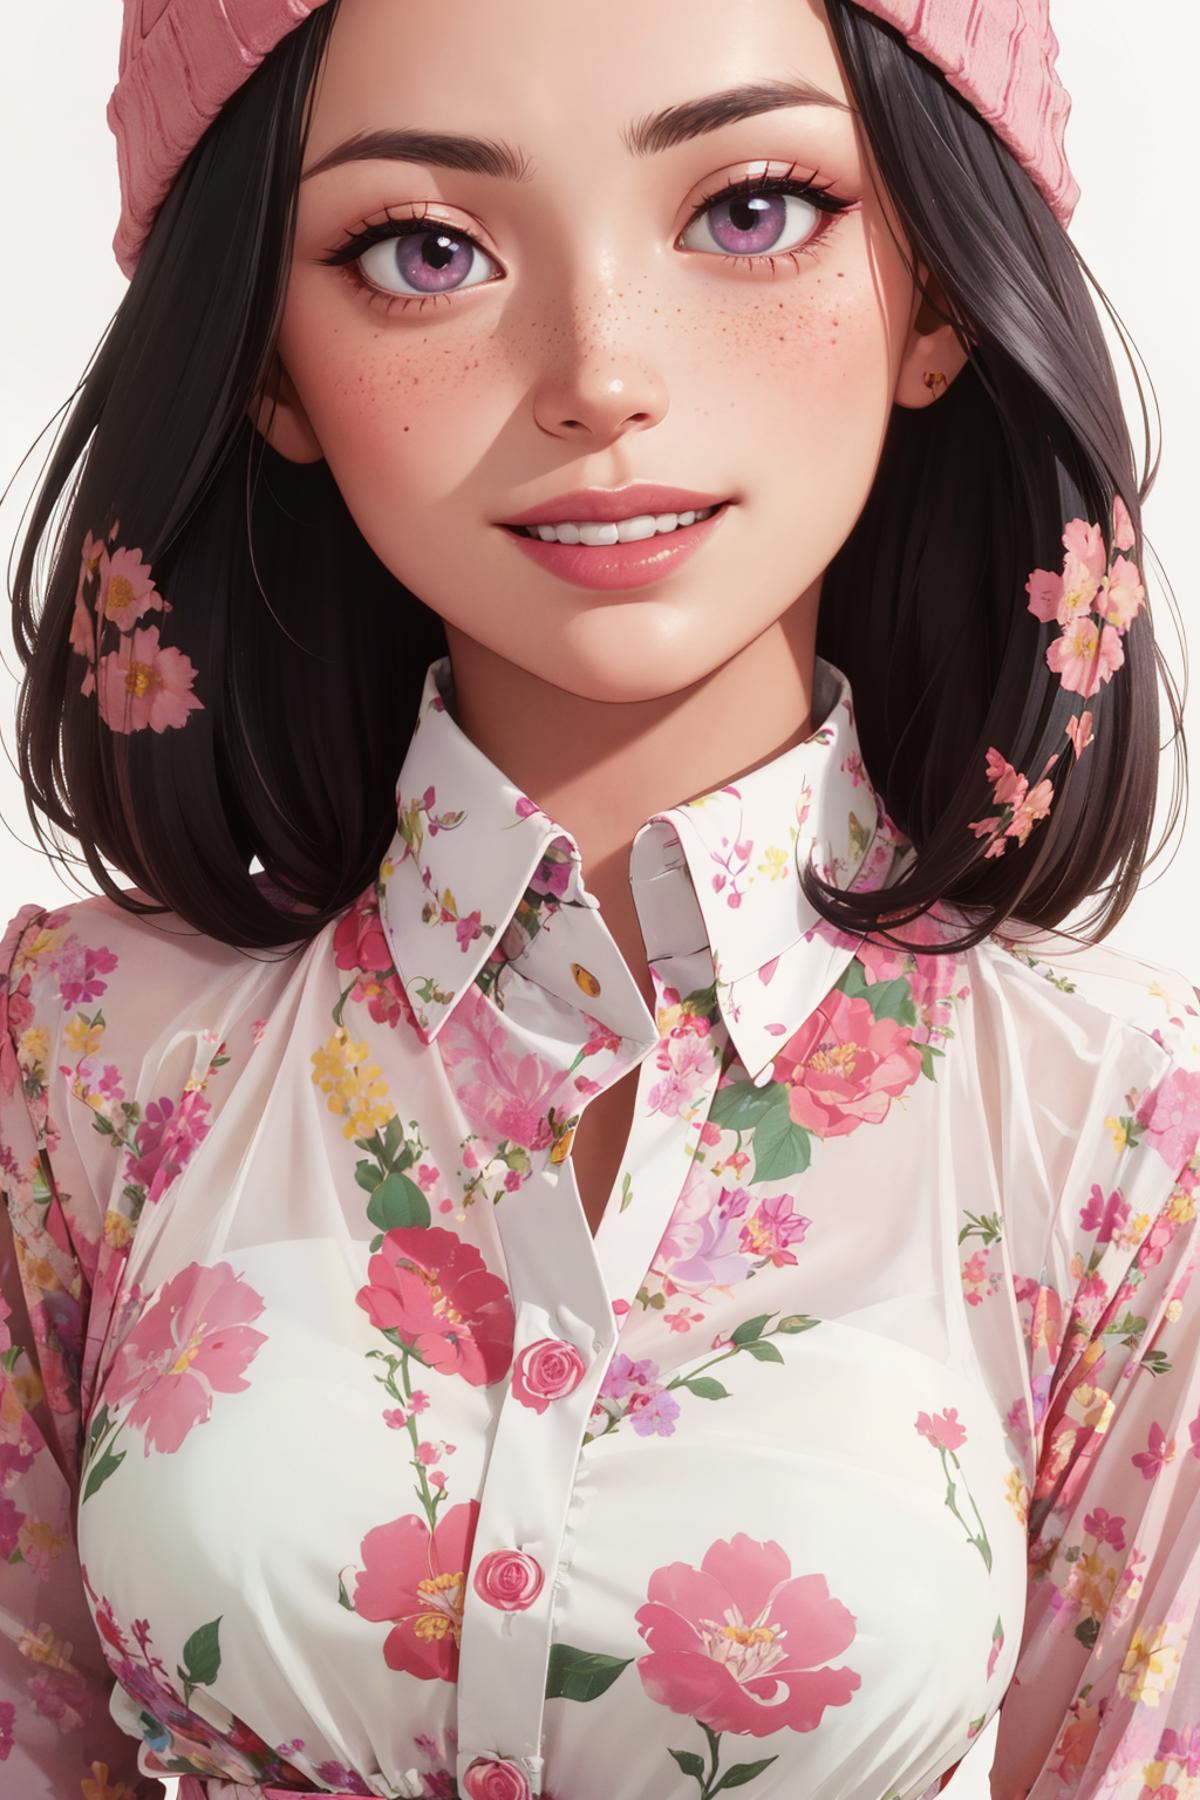 Sheer Floral Shirt & White Shorts image by GroveBadger